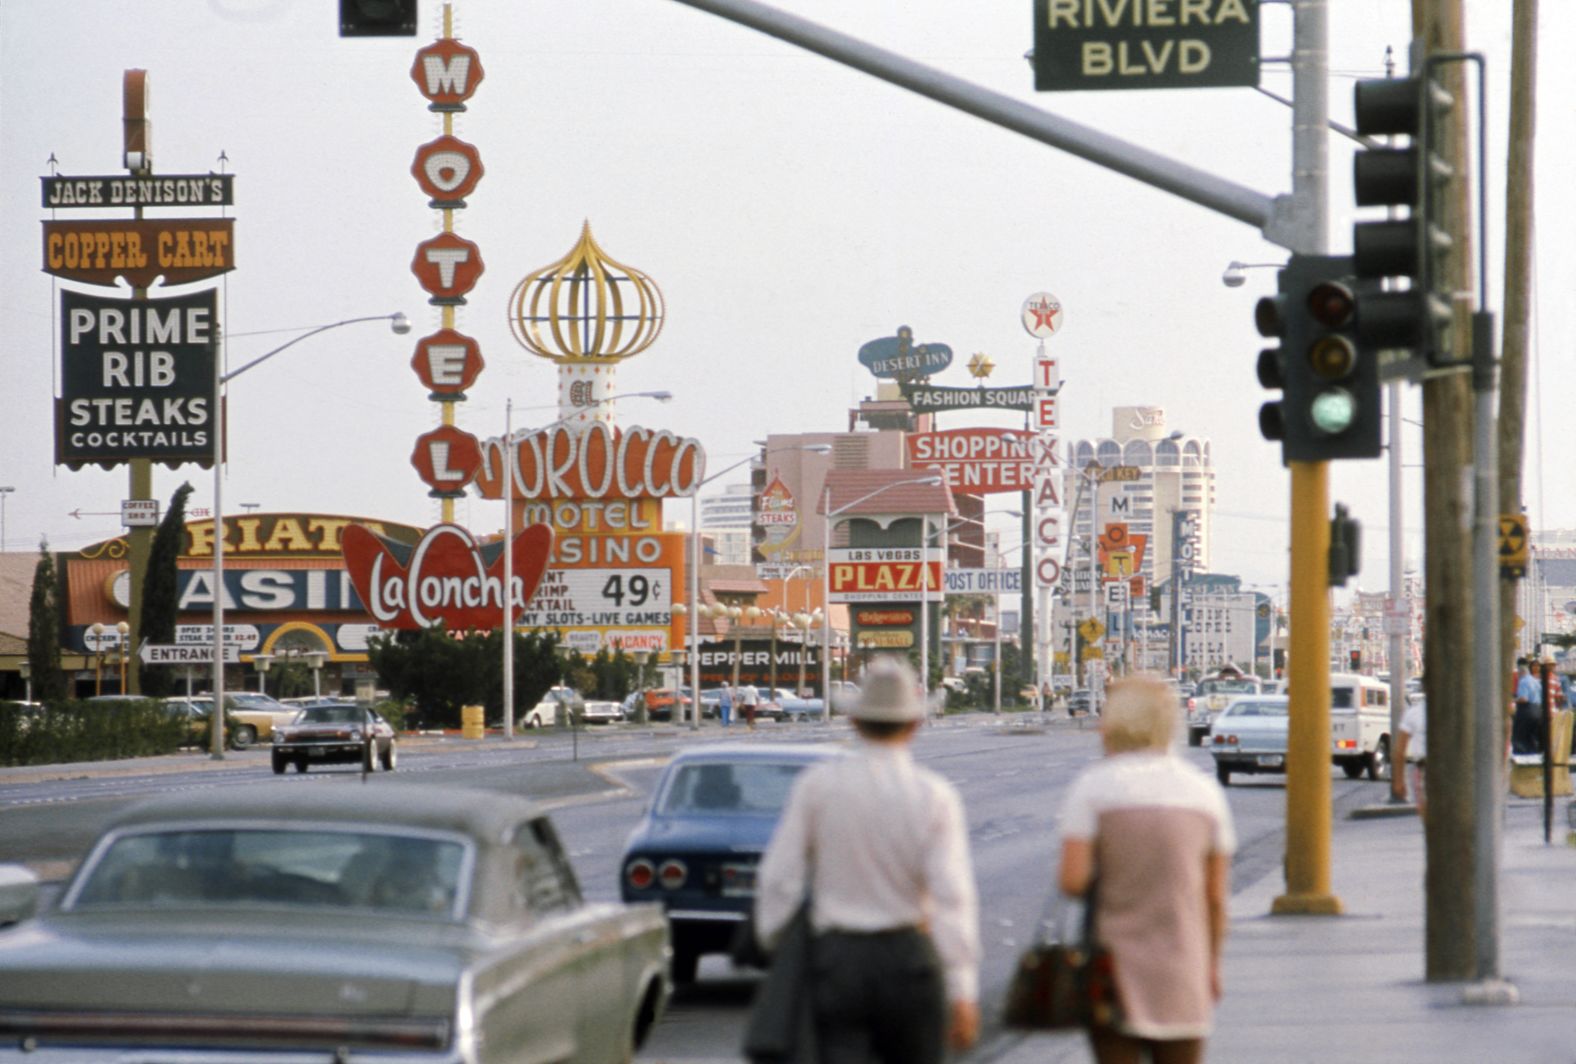 People walk near the intersection of the Las Vegas Strip and Riviera Boulevard in 1975.